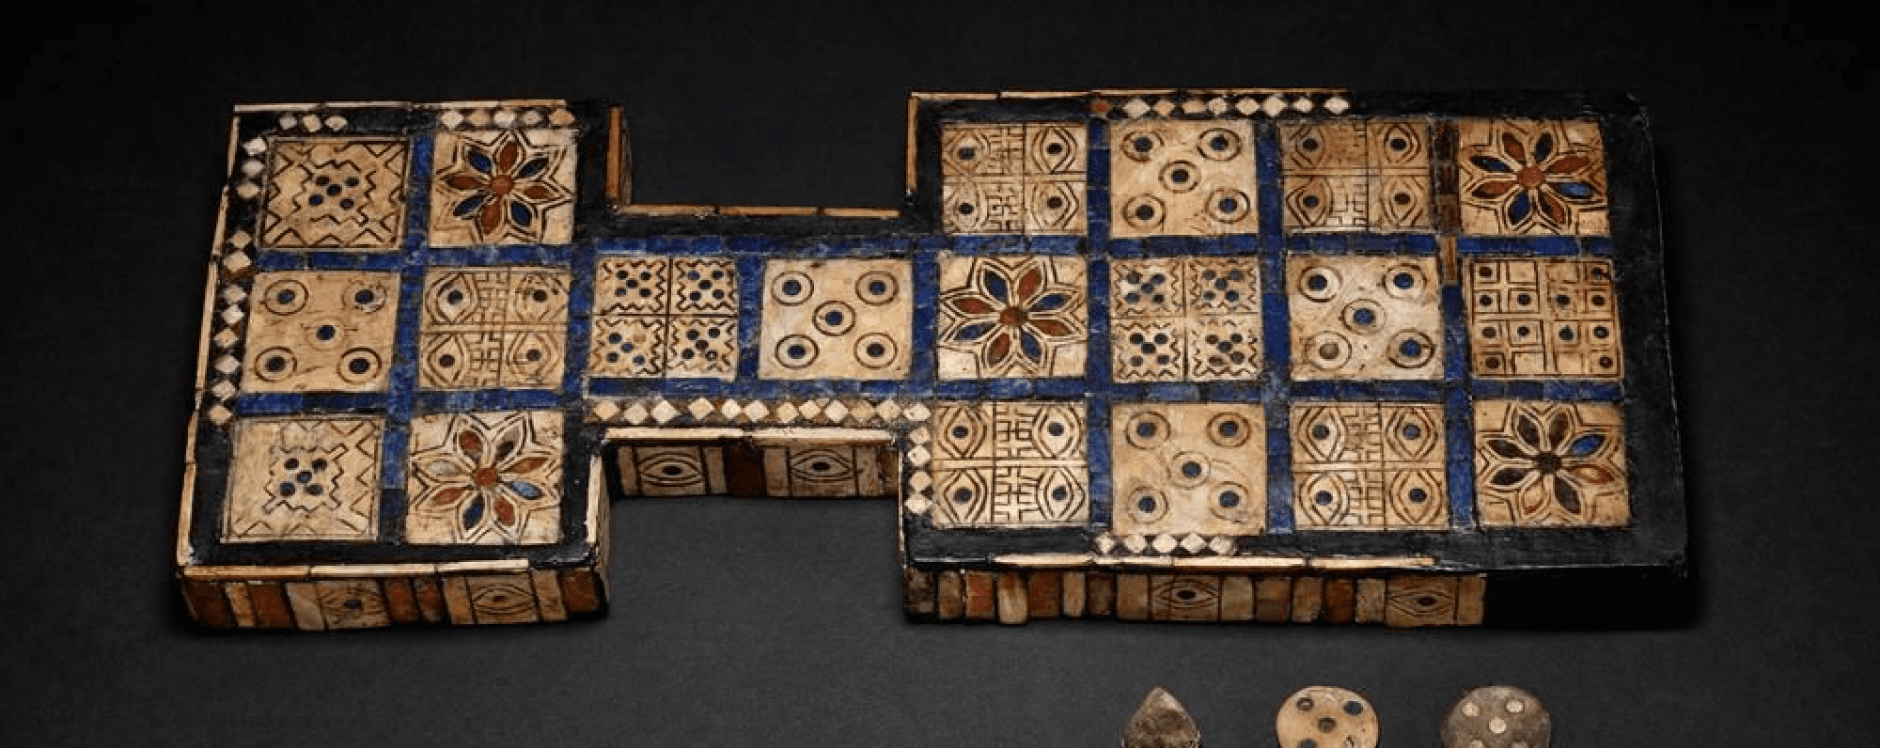 The Royal Game of Ur, the oldest playable board game in the world, originating around 4,600 years ago in ancient Mesopotamia.